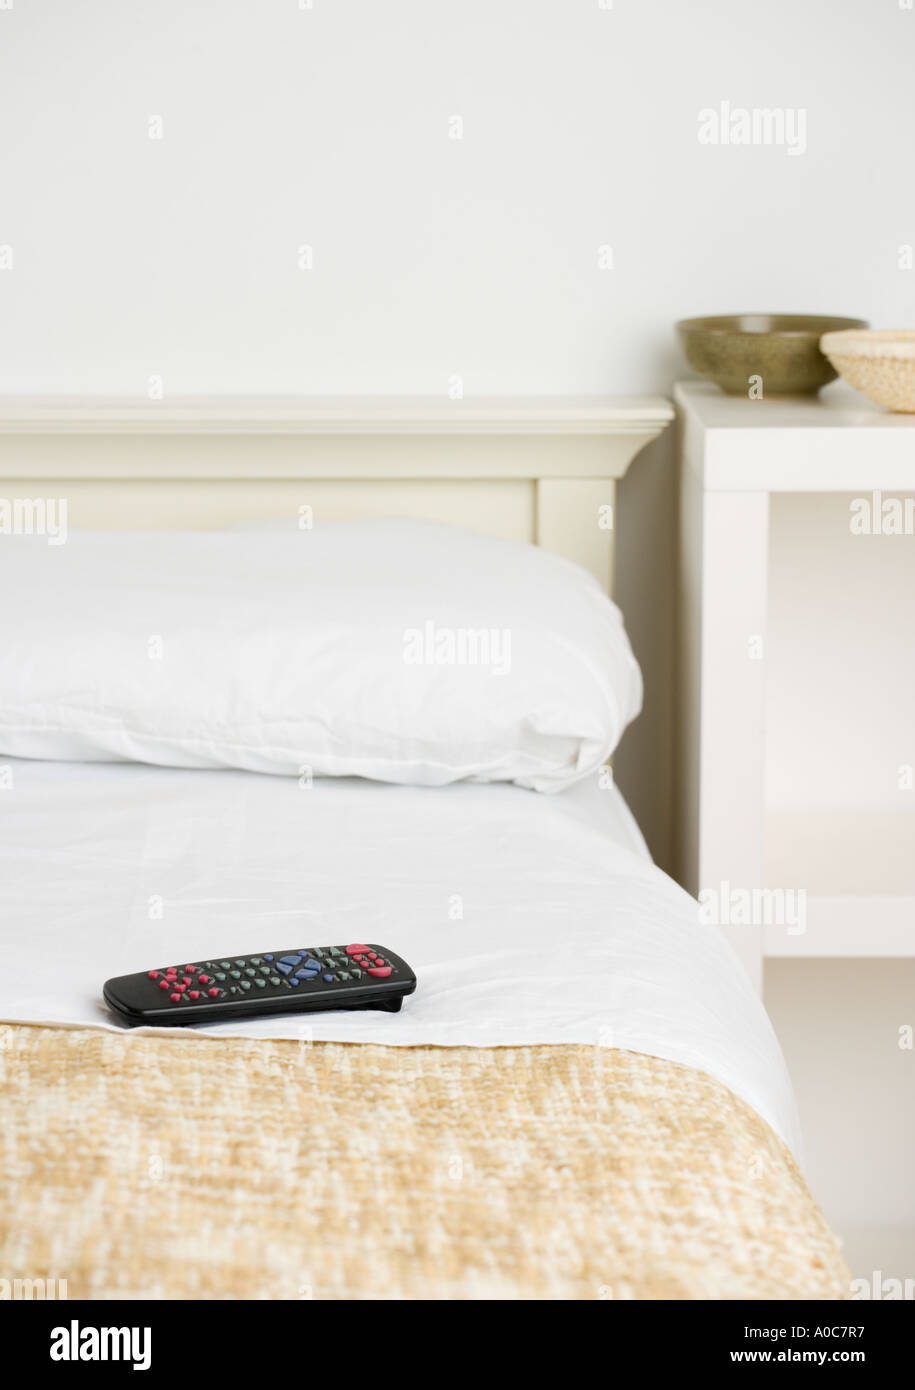 Still life of remote control on bed Stock Photo